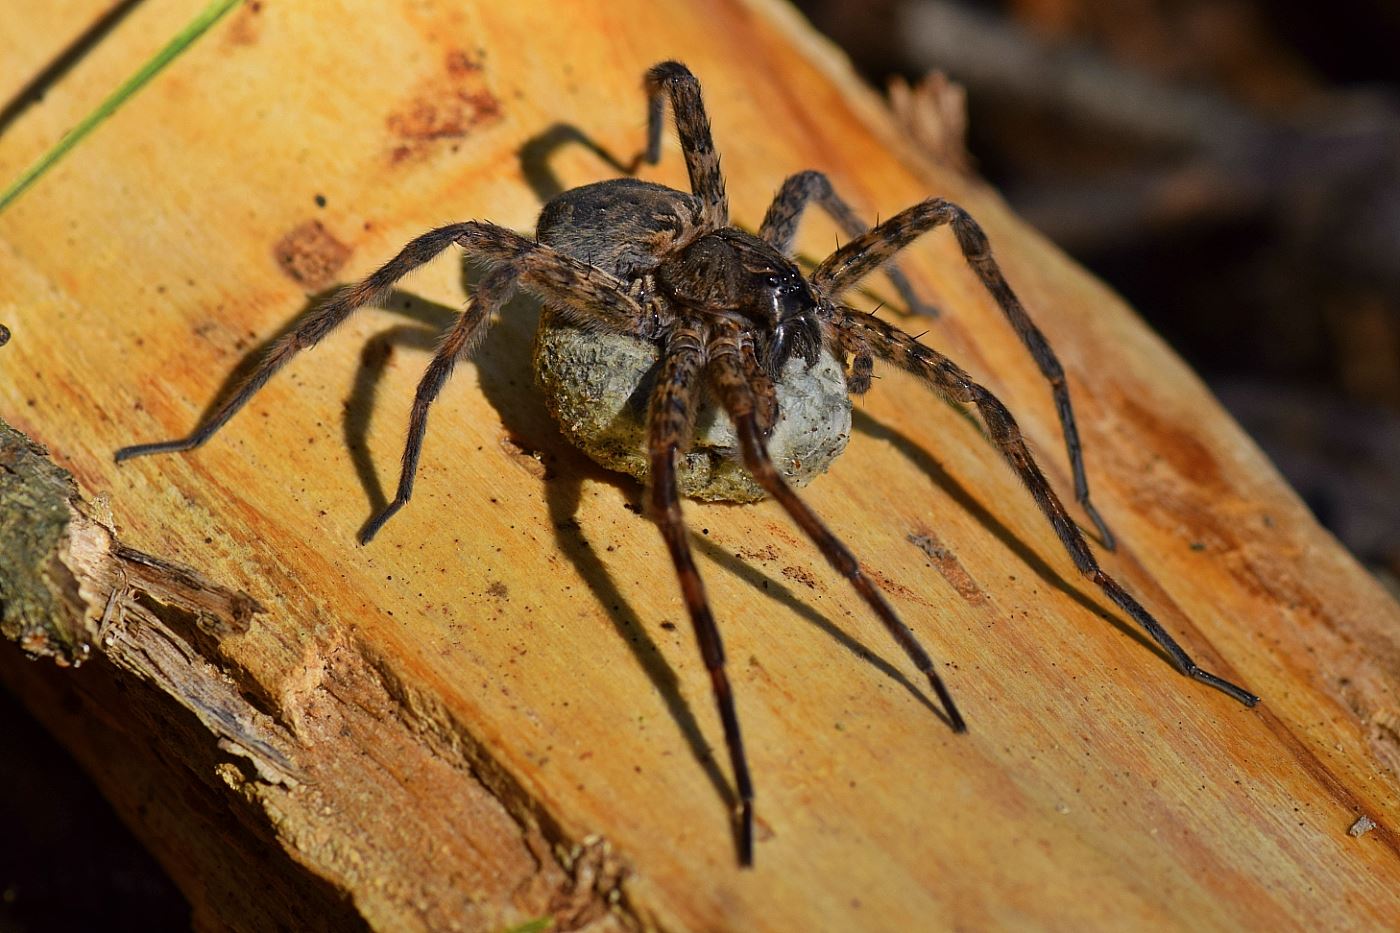 https://upload.wikimedia.org/wikipedia/commons/d/dd/Fishing_Spider_With_Egg_Sac_%2821519878240%29.jpg